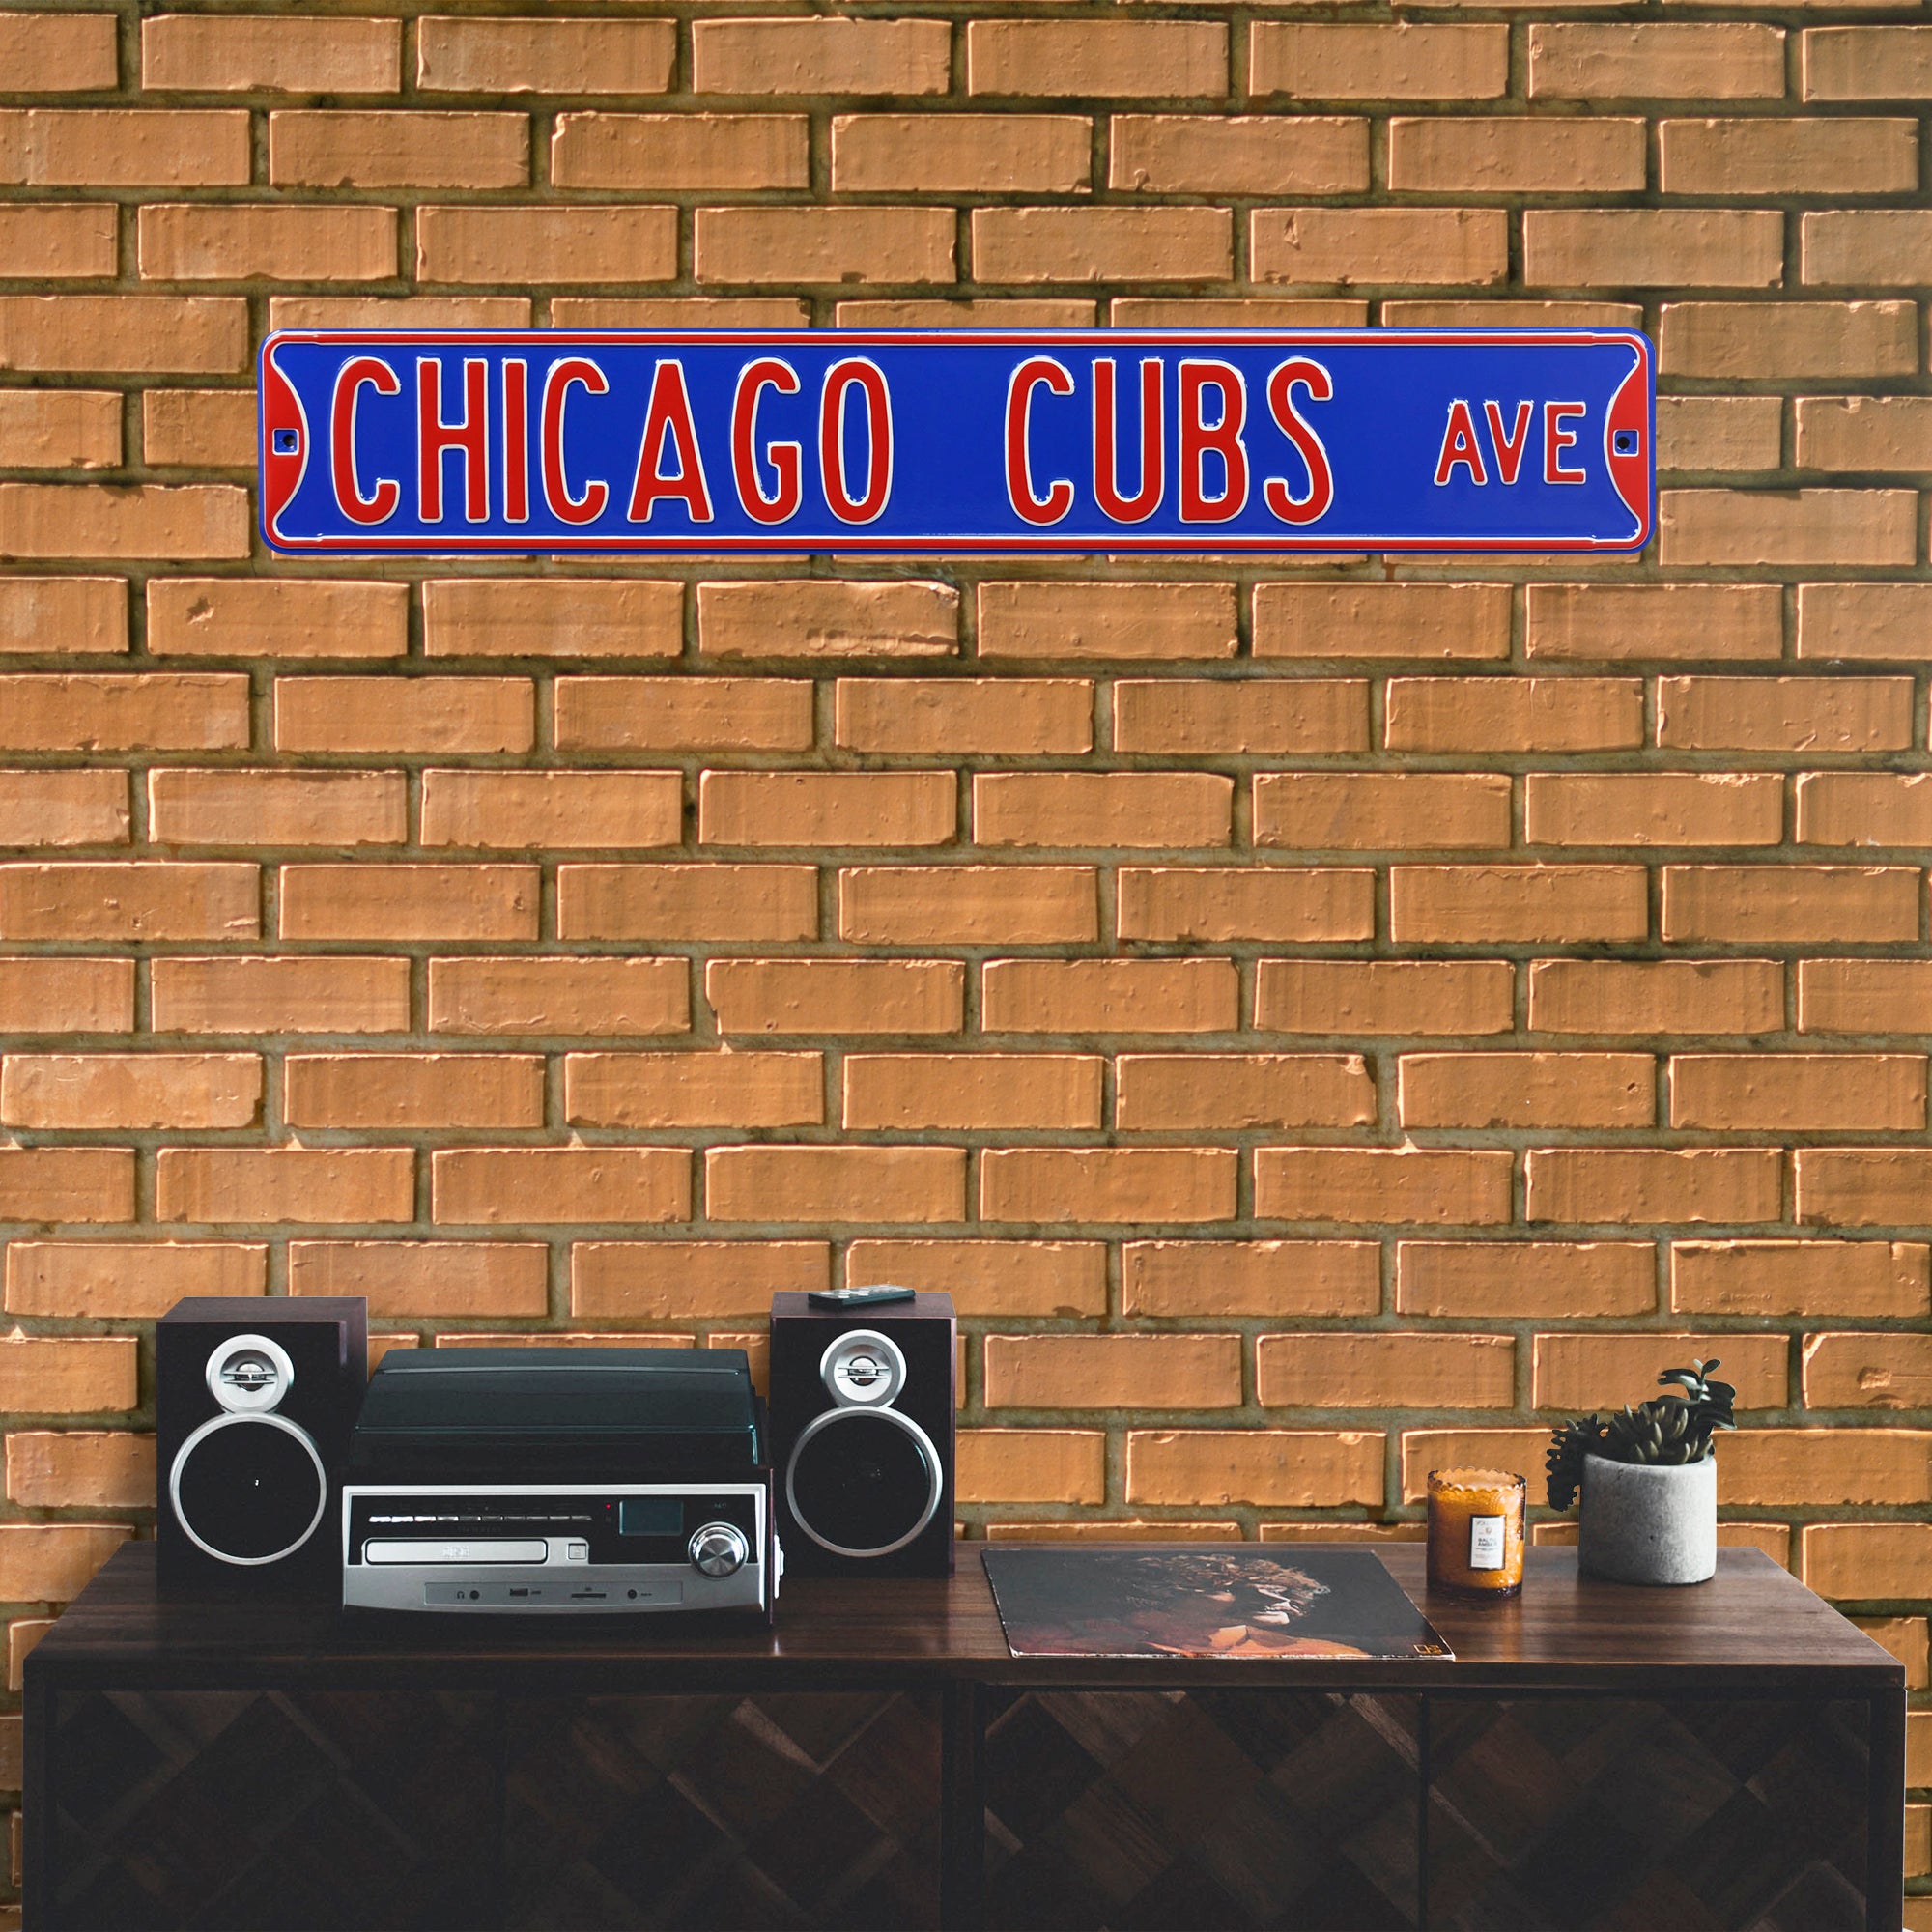 Chicago Cubs Steel Street Sign-CHICAGO CUBS AVE 36" W x 6" H by Fathead